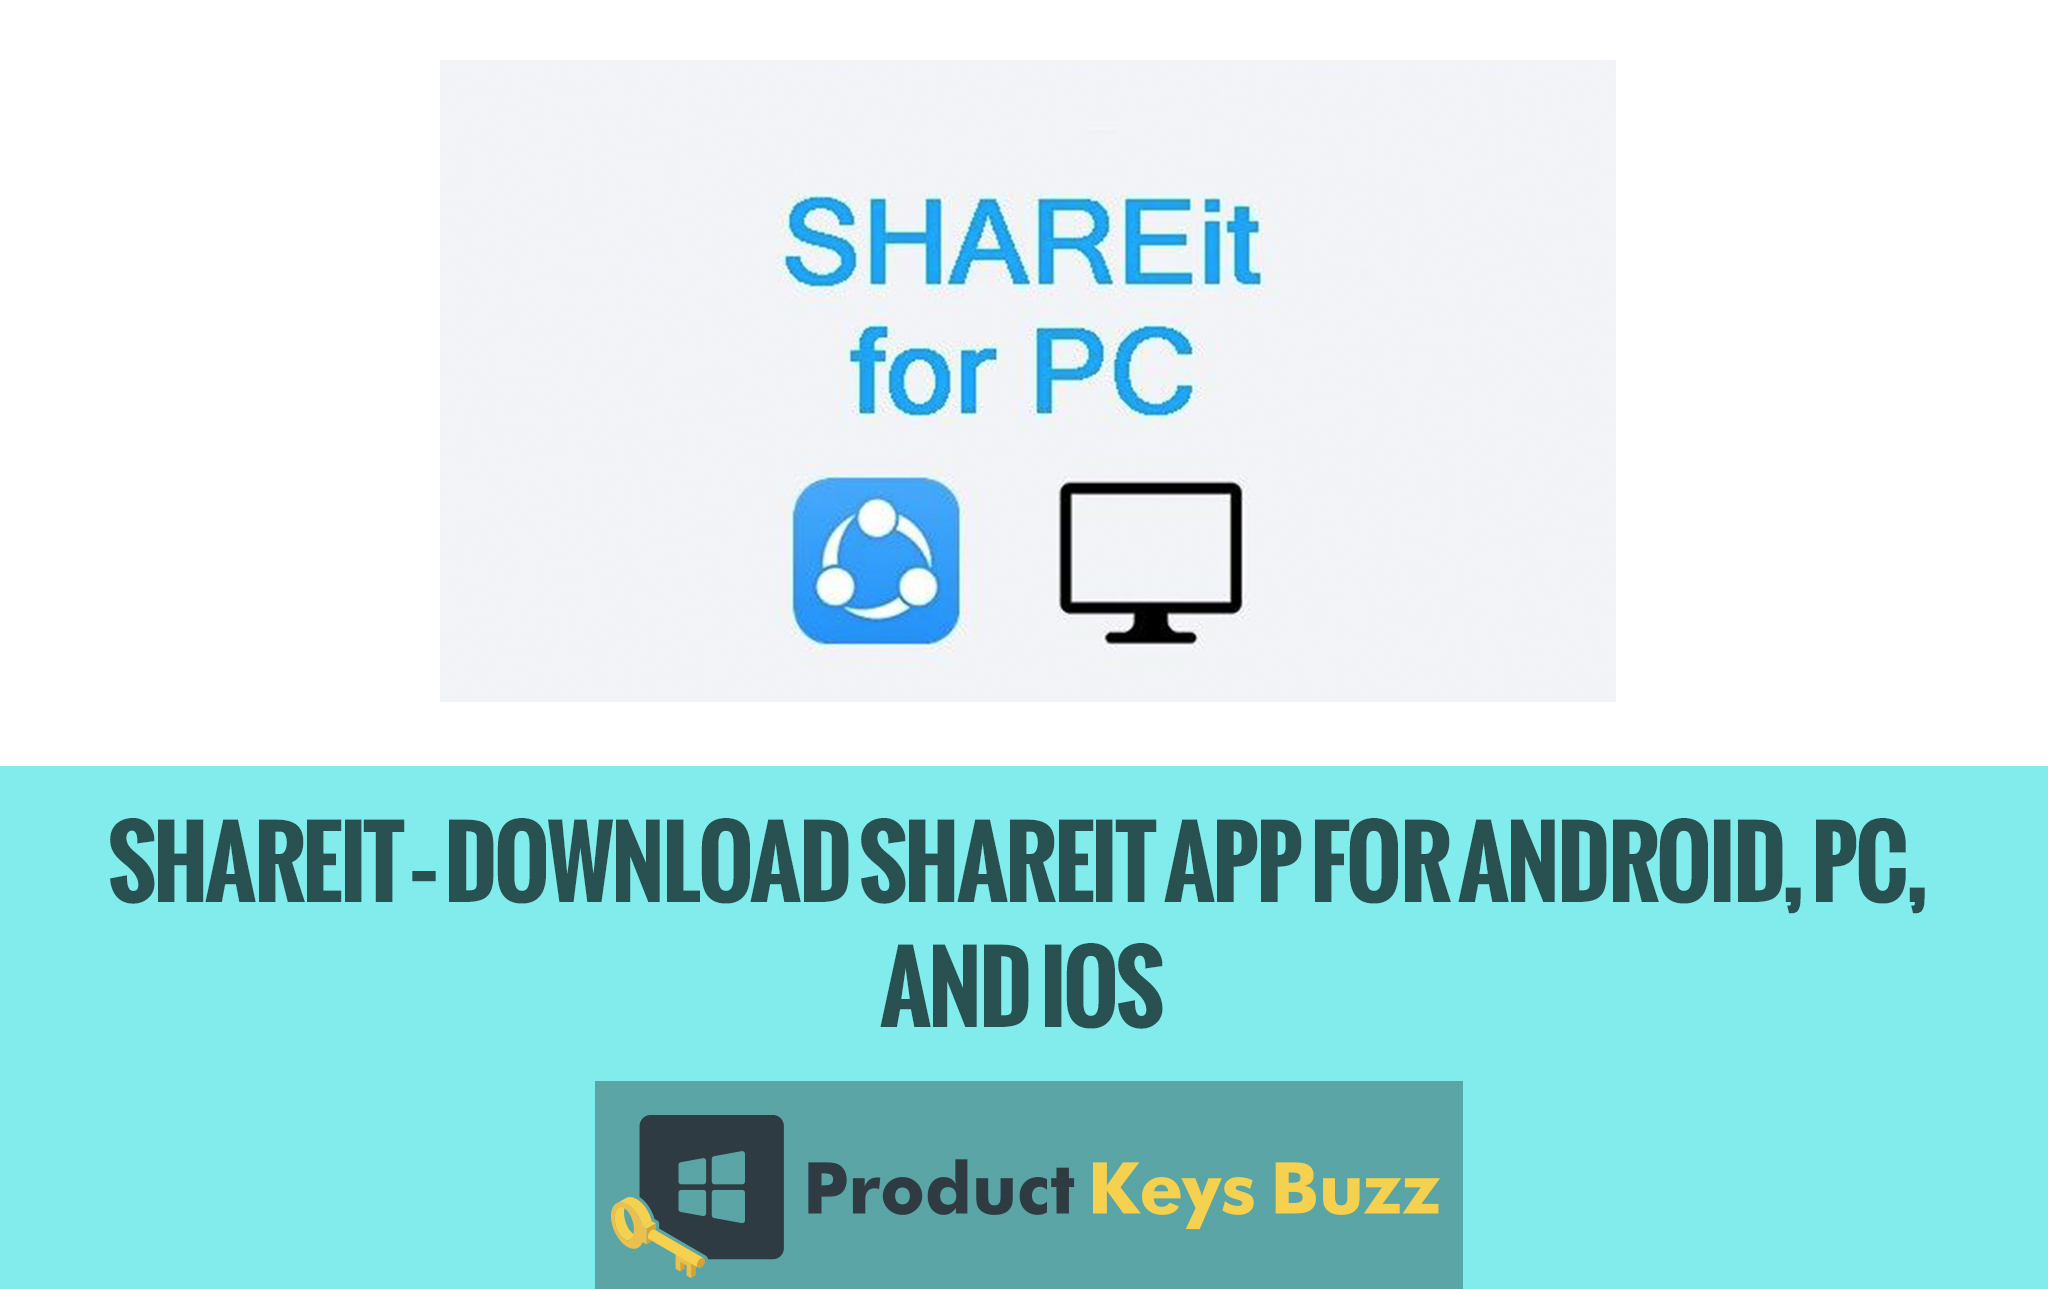 Download SHAREit for Android, PC, and iOS